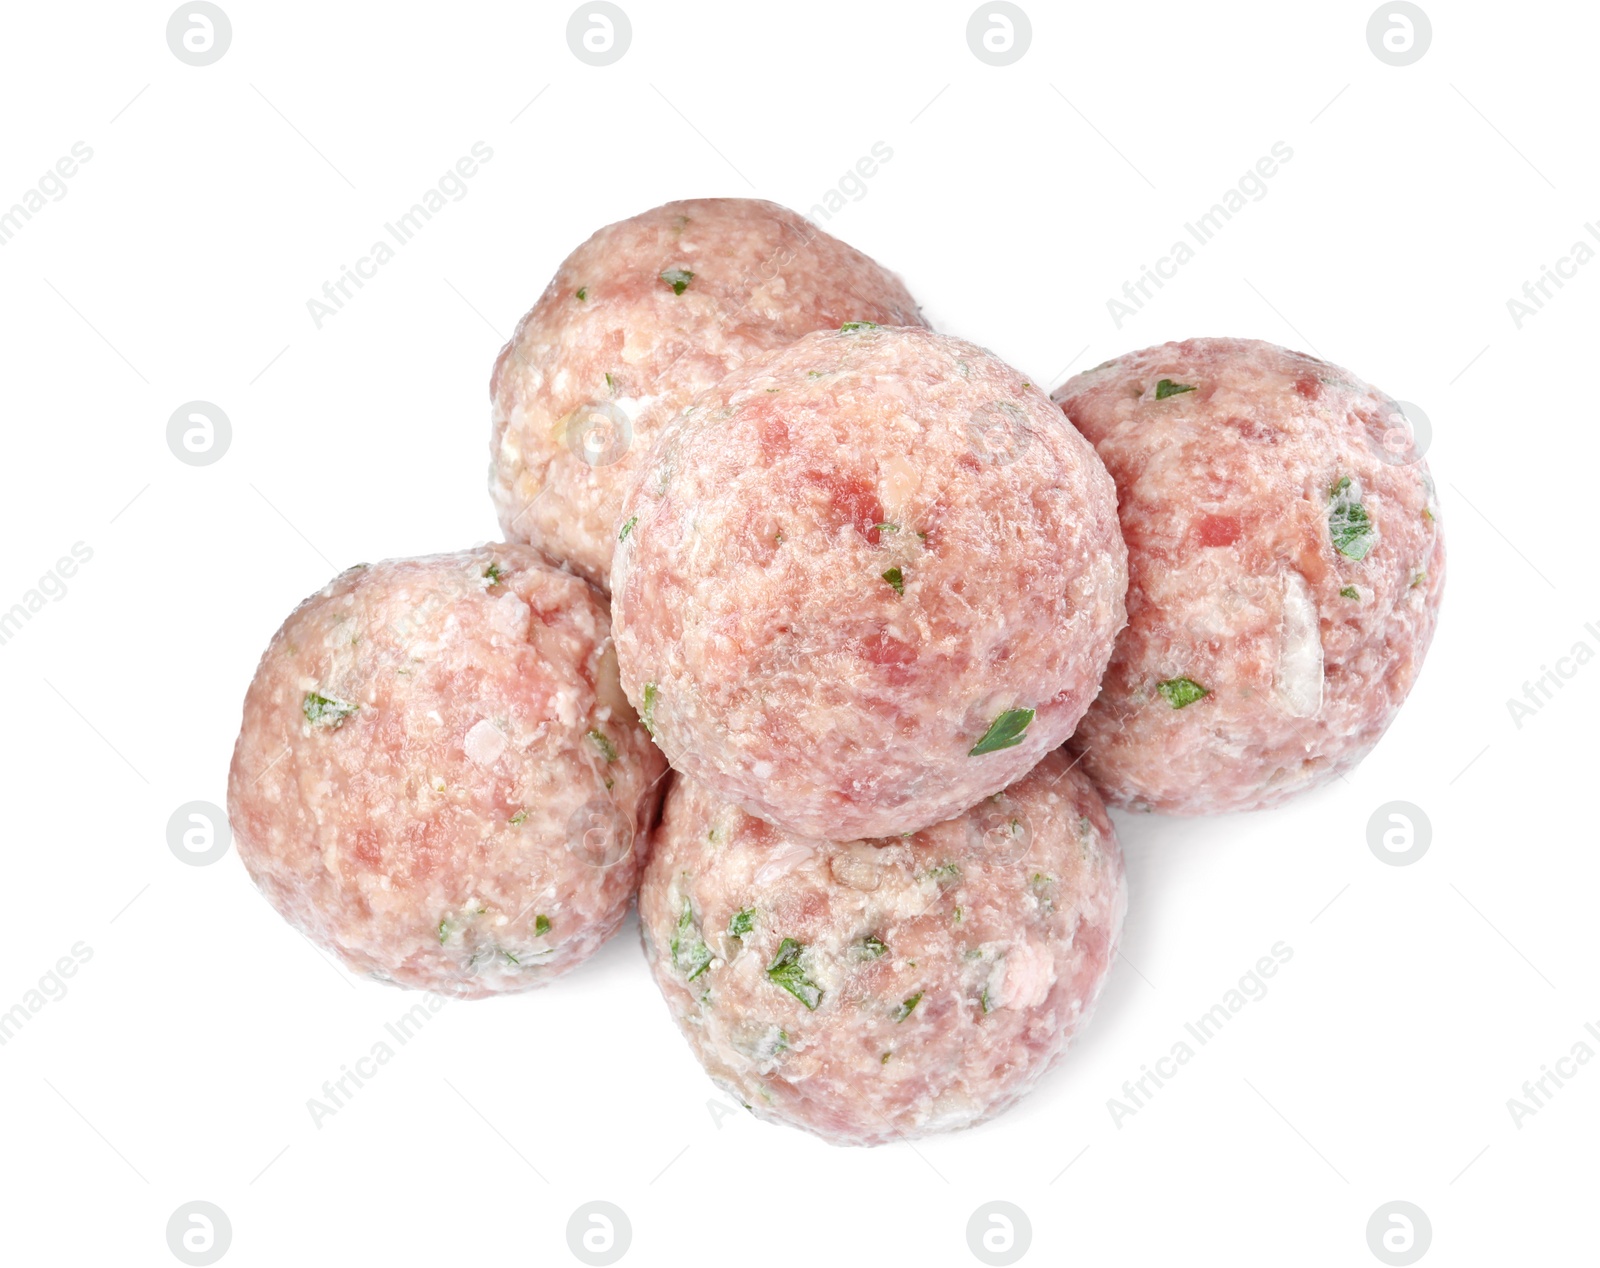 Photo of Many fresh raw meatballs on white background, top view